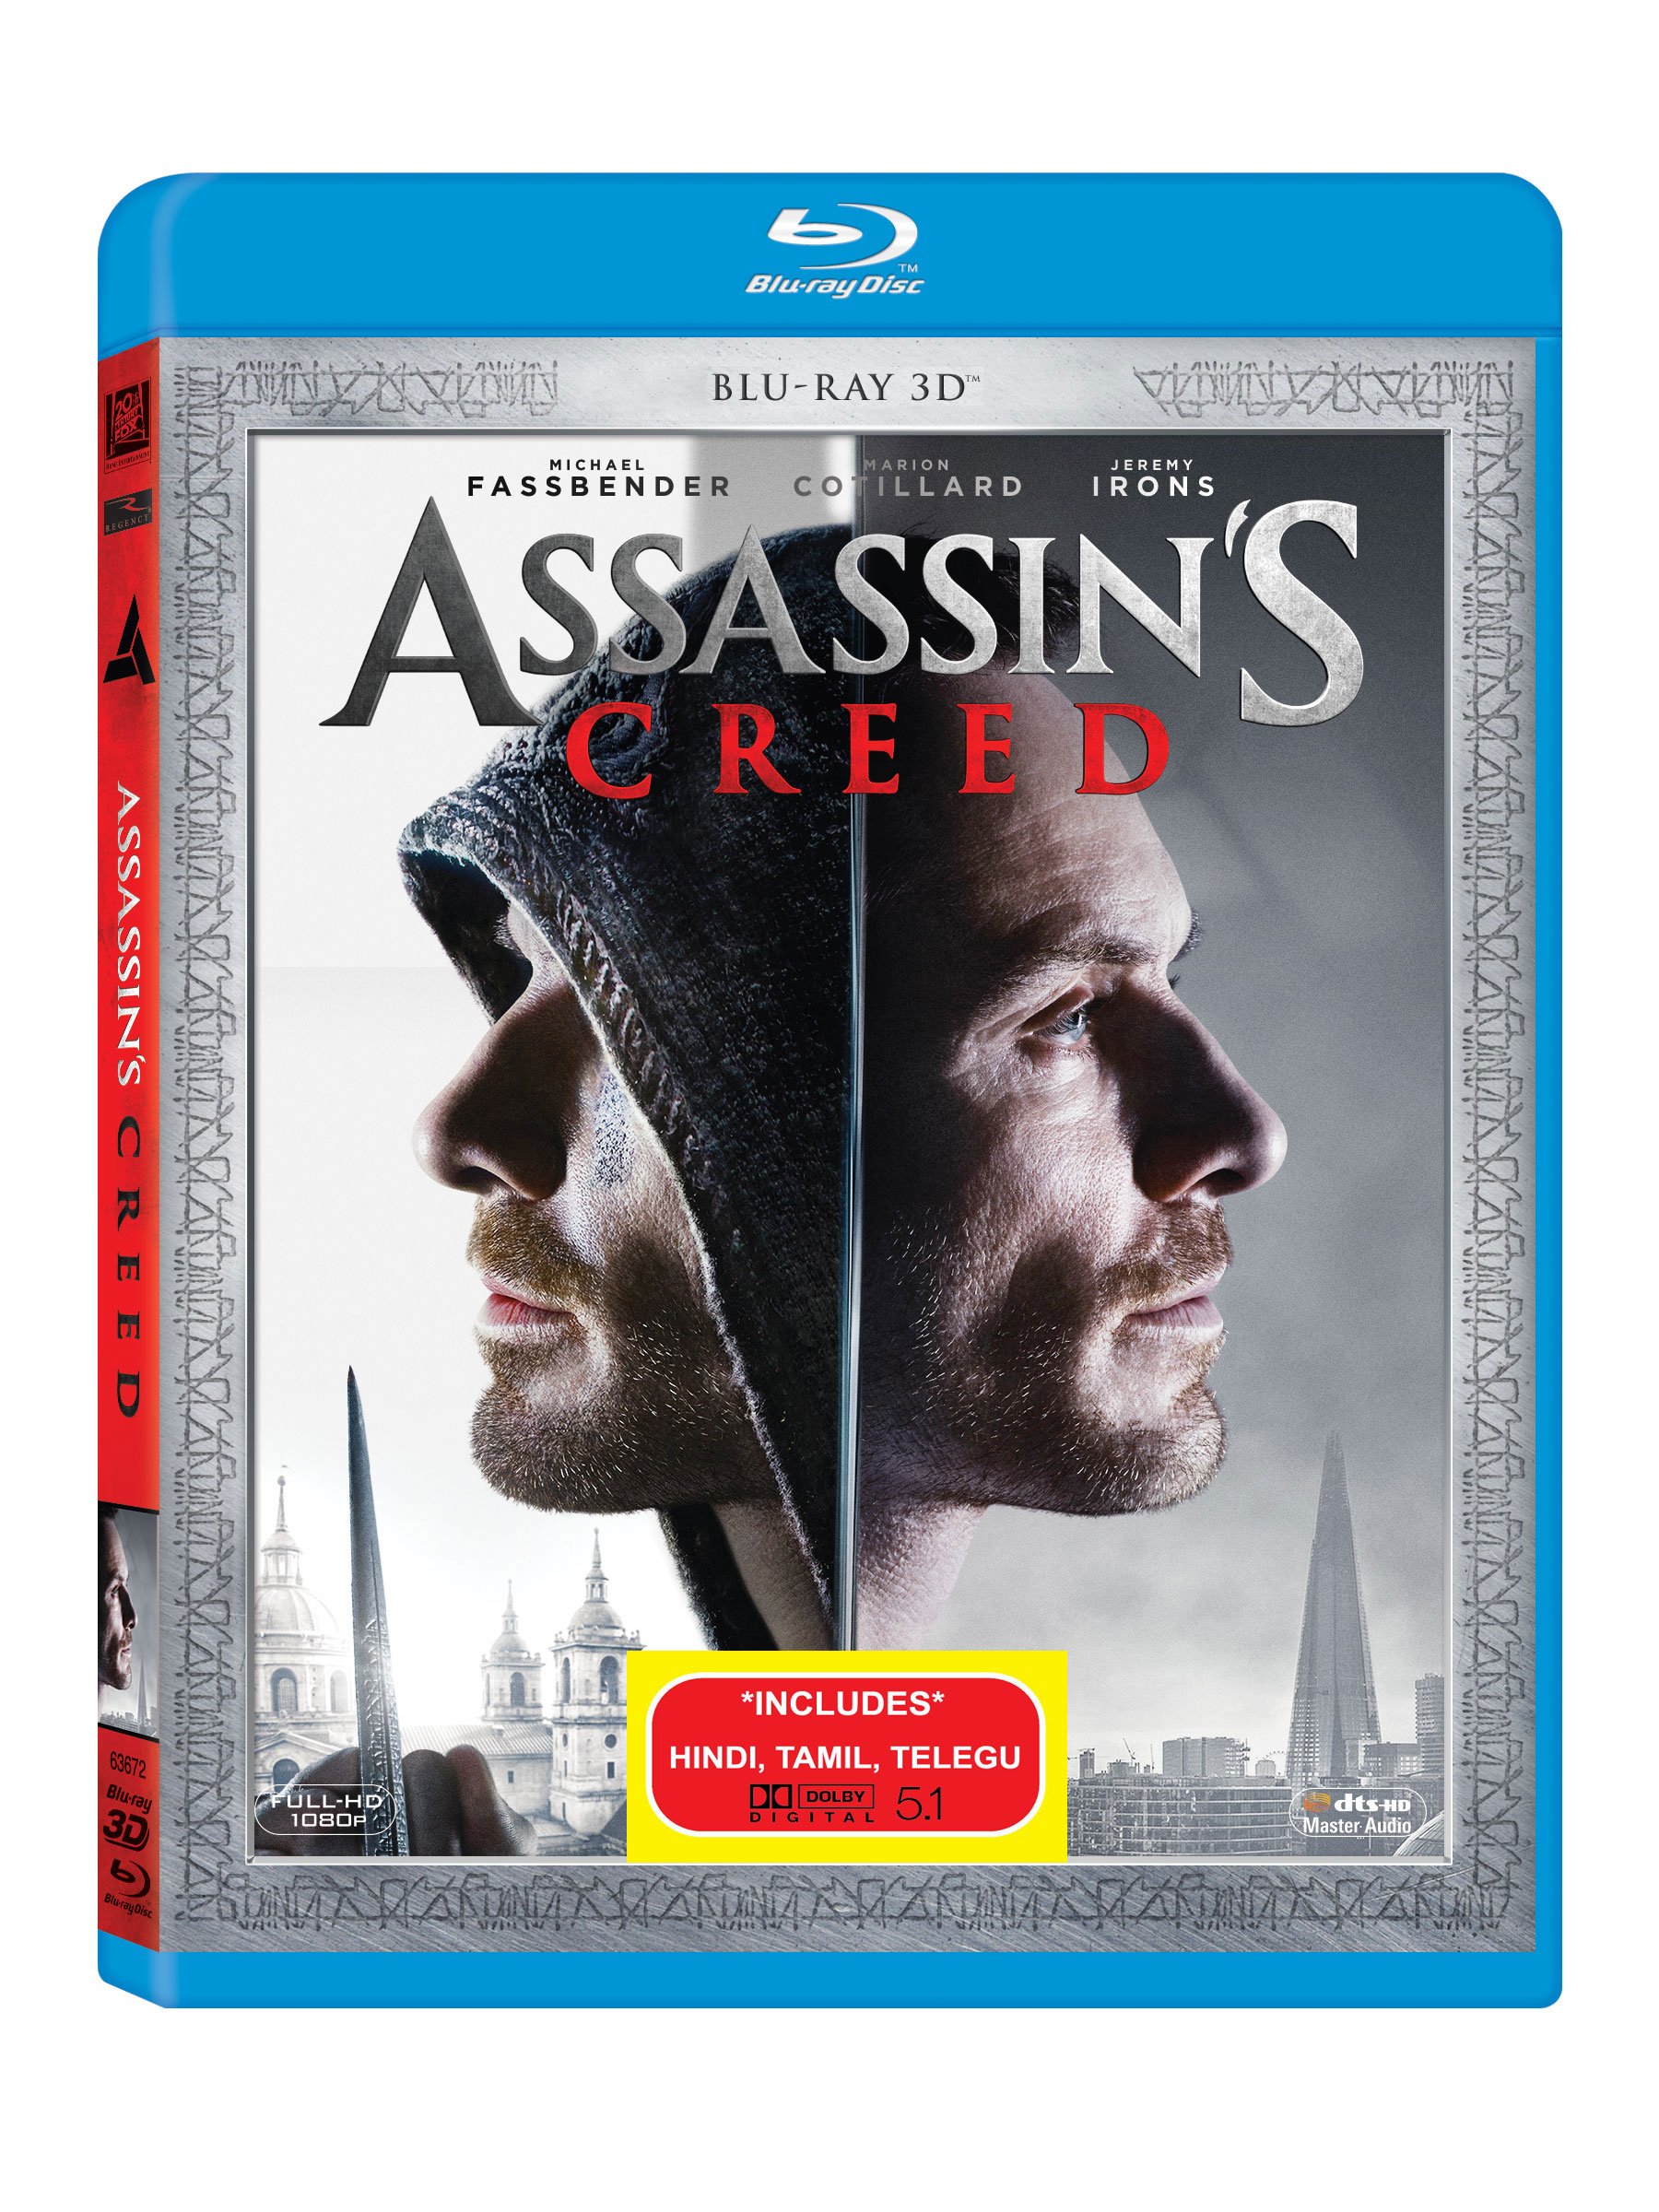 assassins-creed-blu-ray-3d-movie-purchase-or-watch-online